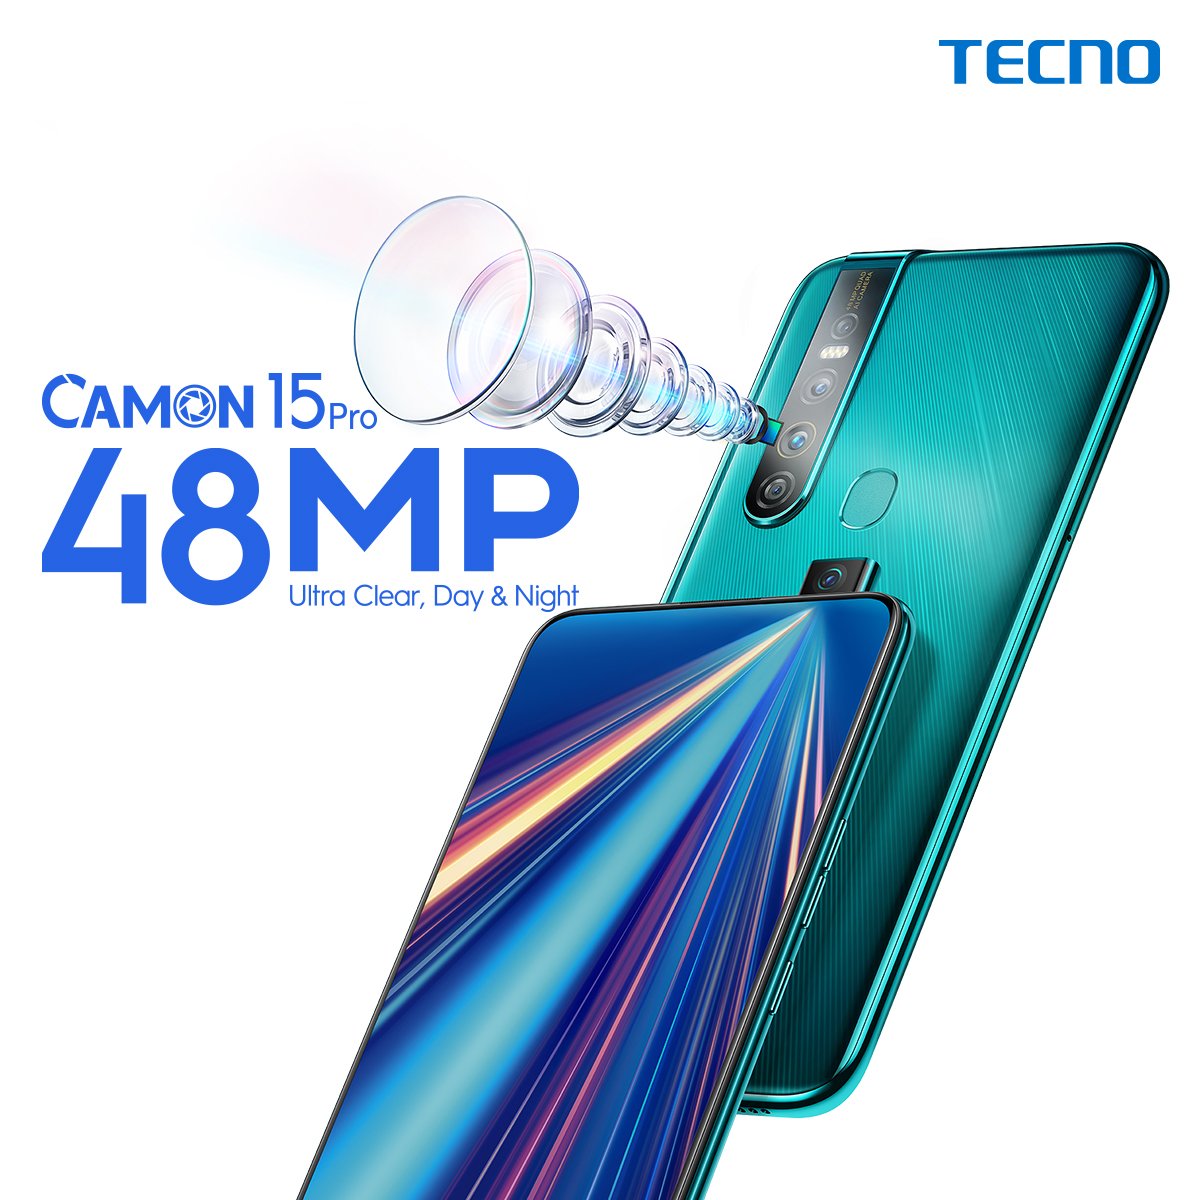 9) It features a 32 MP Integrated Pop-up Camera plus matching pop-up Light and sound effects presenting new selfie experience each time the camera pops up. #Canon15Launch #UltraClearDaynNight #TECNOXWIZKID